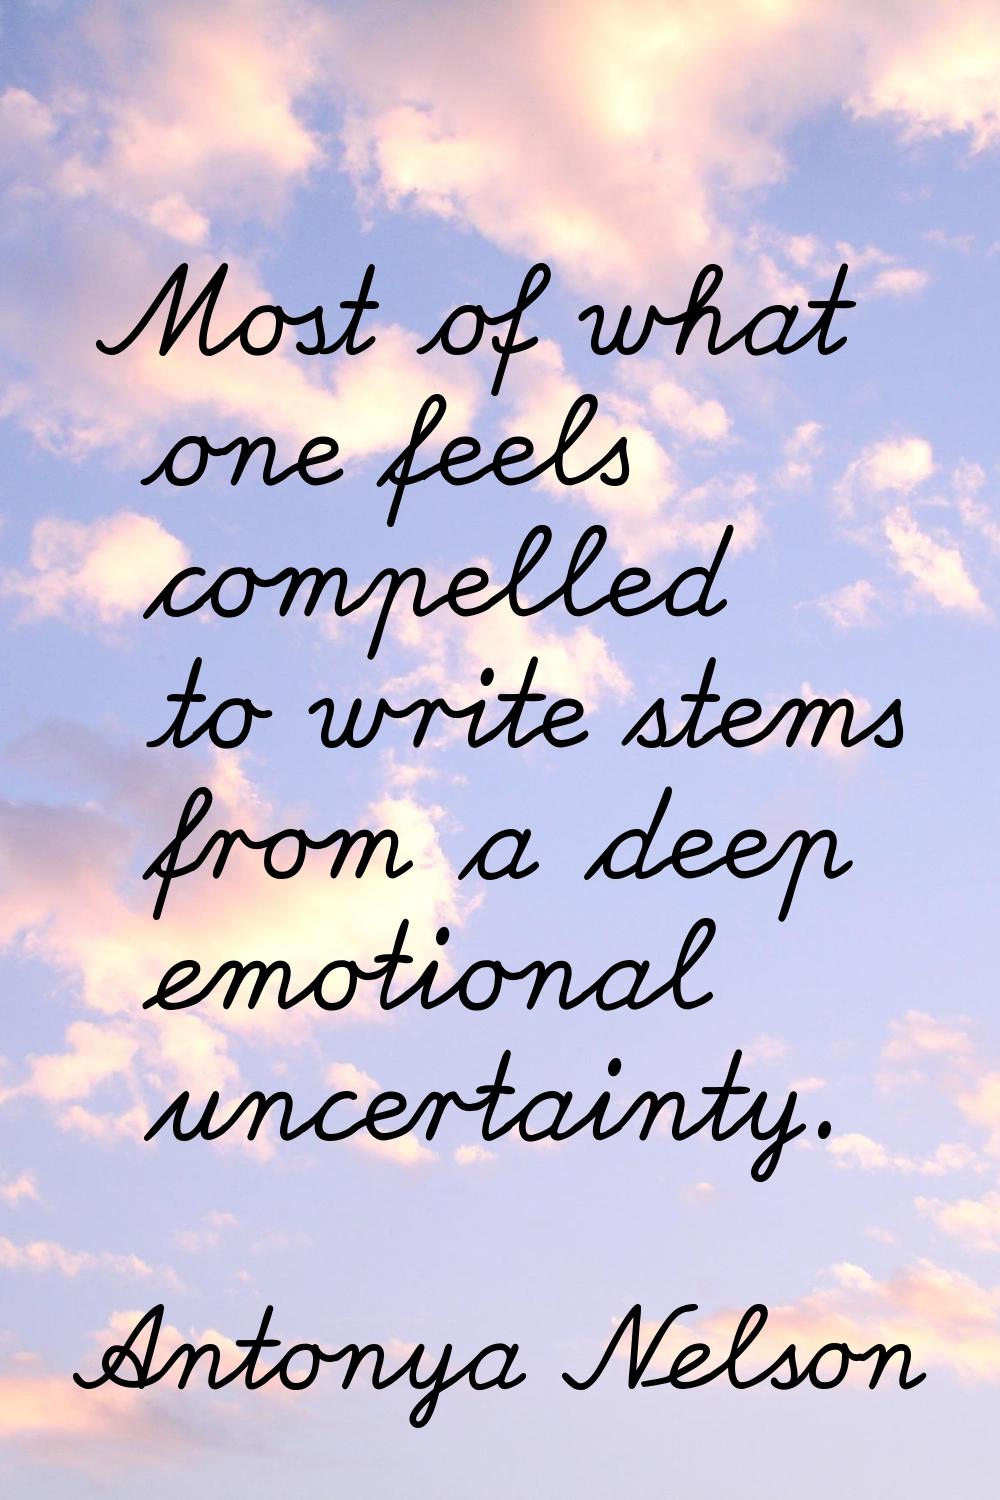 Most of what one feels compelled to write stems from a deep emotional uncertainty.